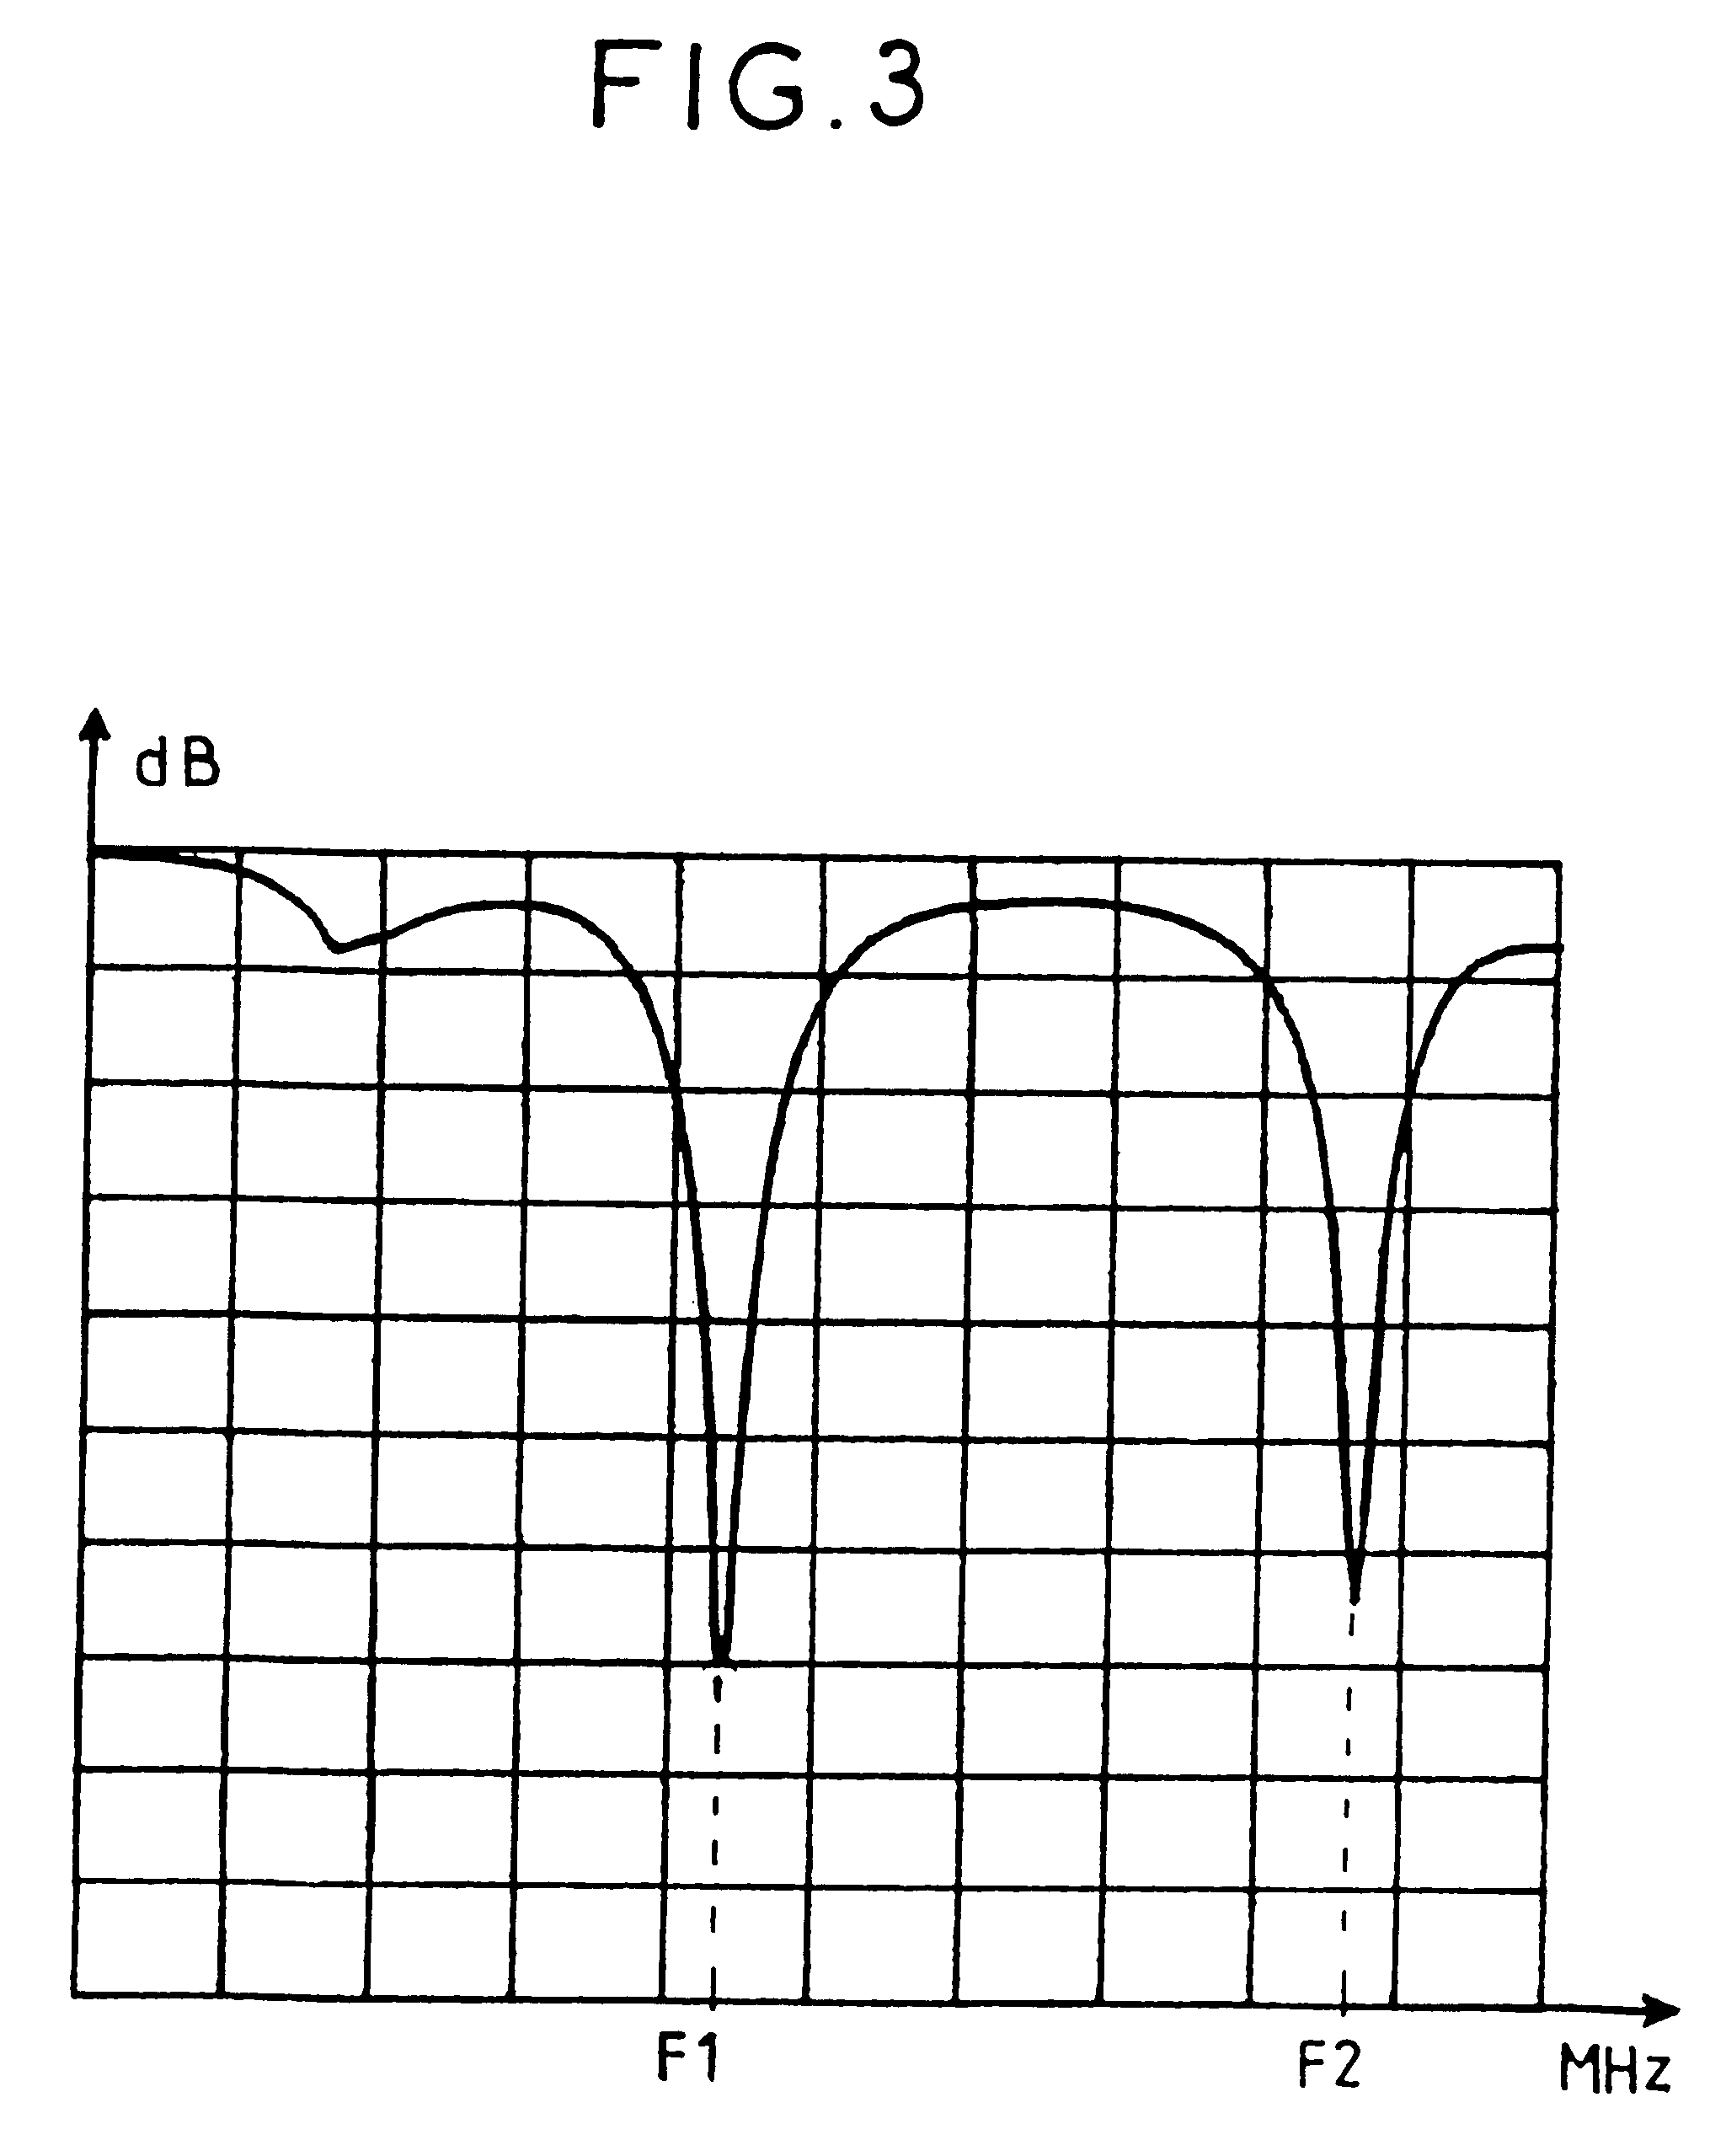 Radiocommunication device and a dual-frequency microstrip antenna